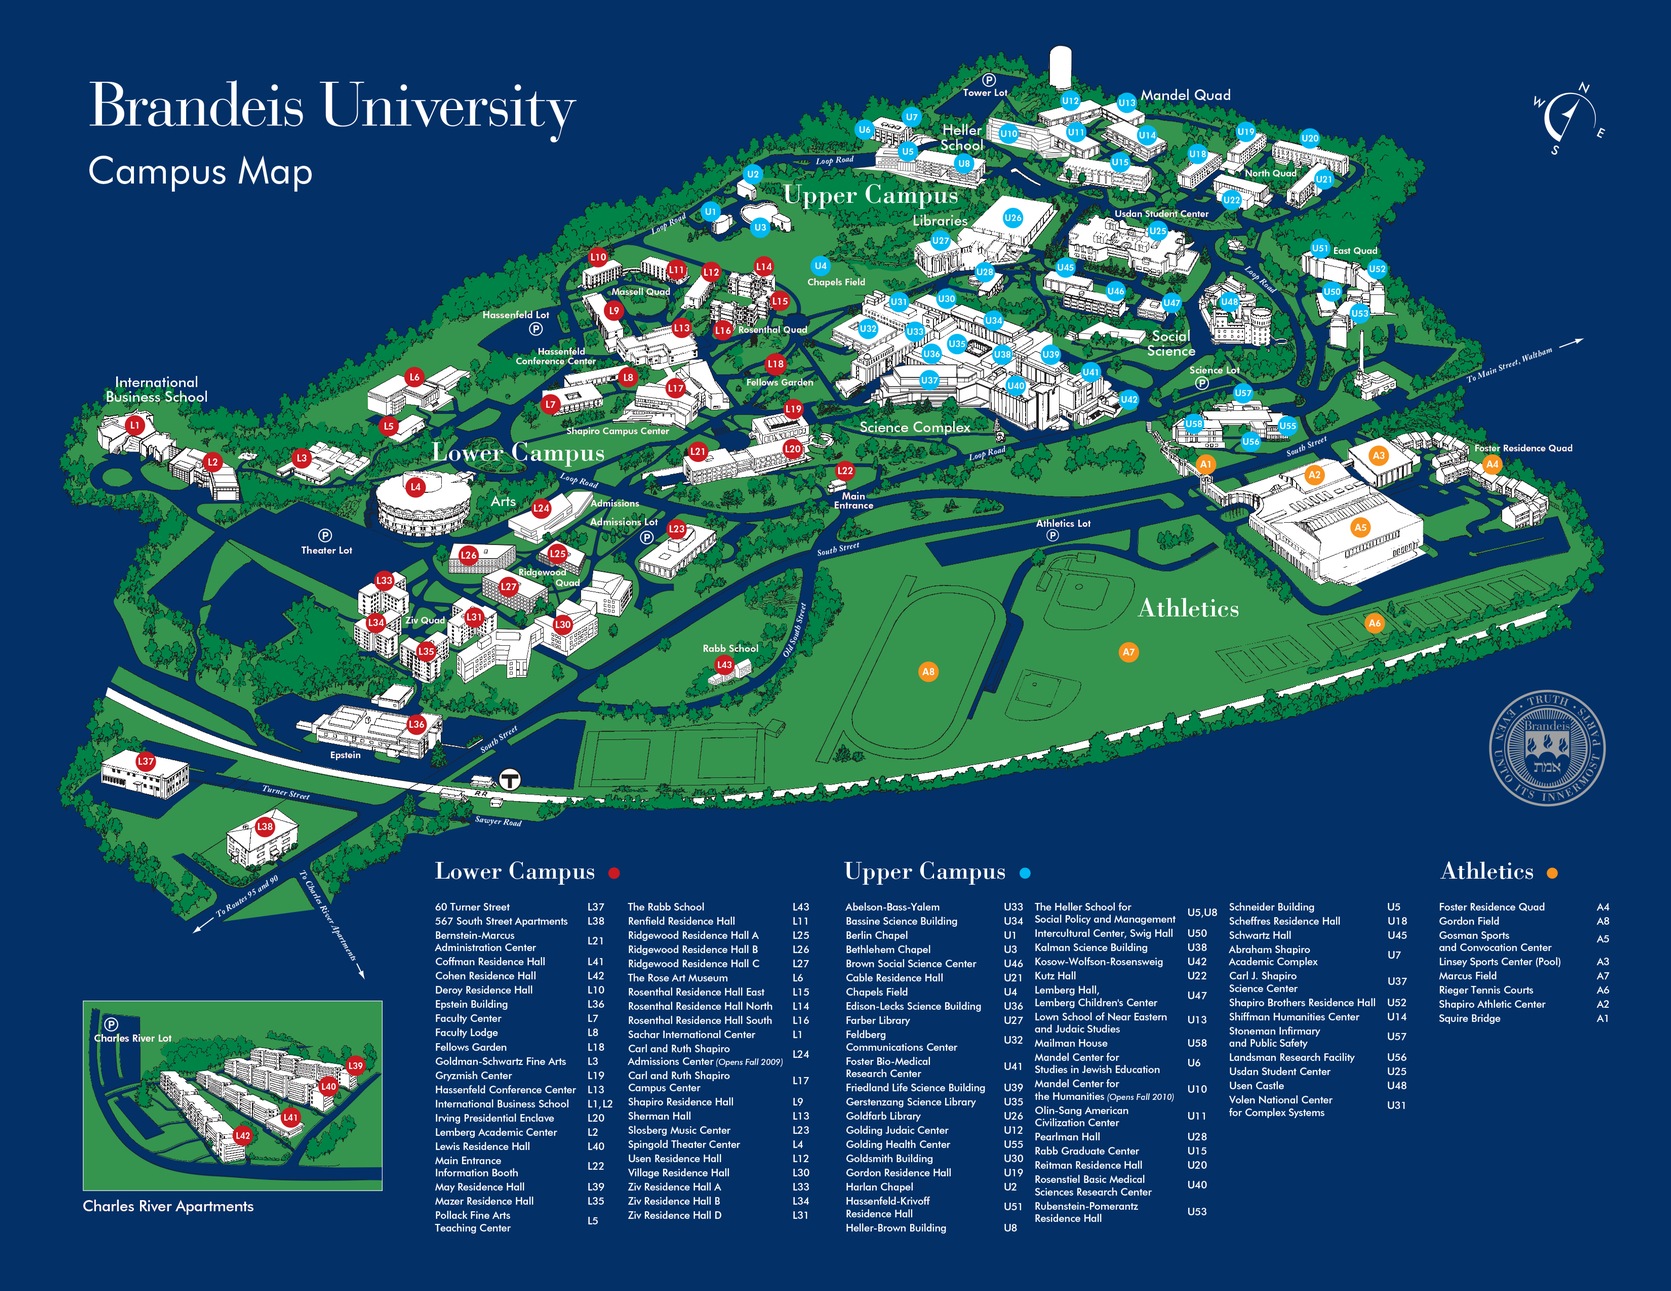 Go to the interactive campus map